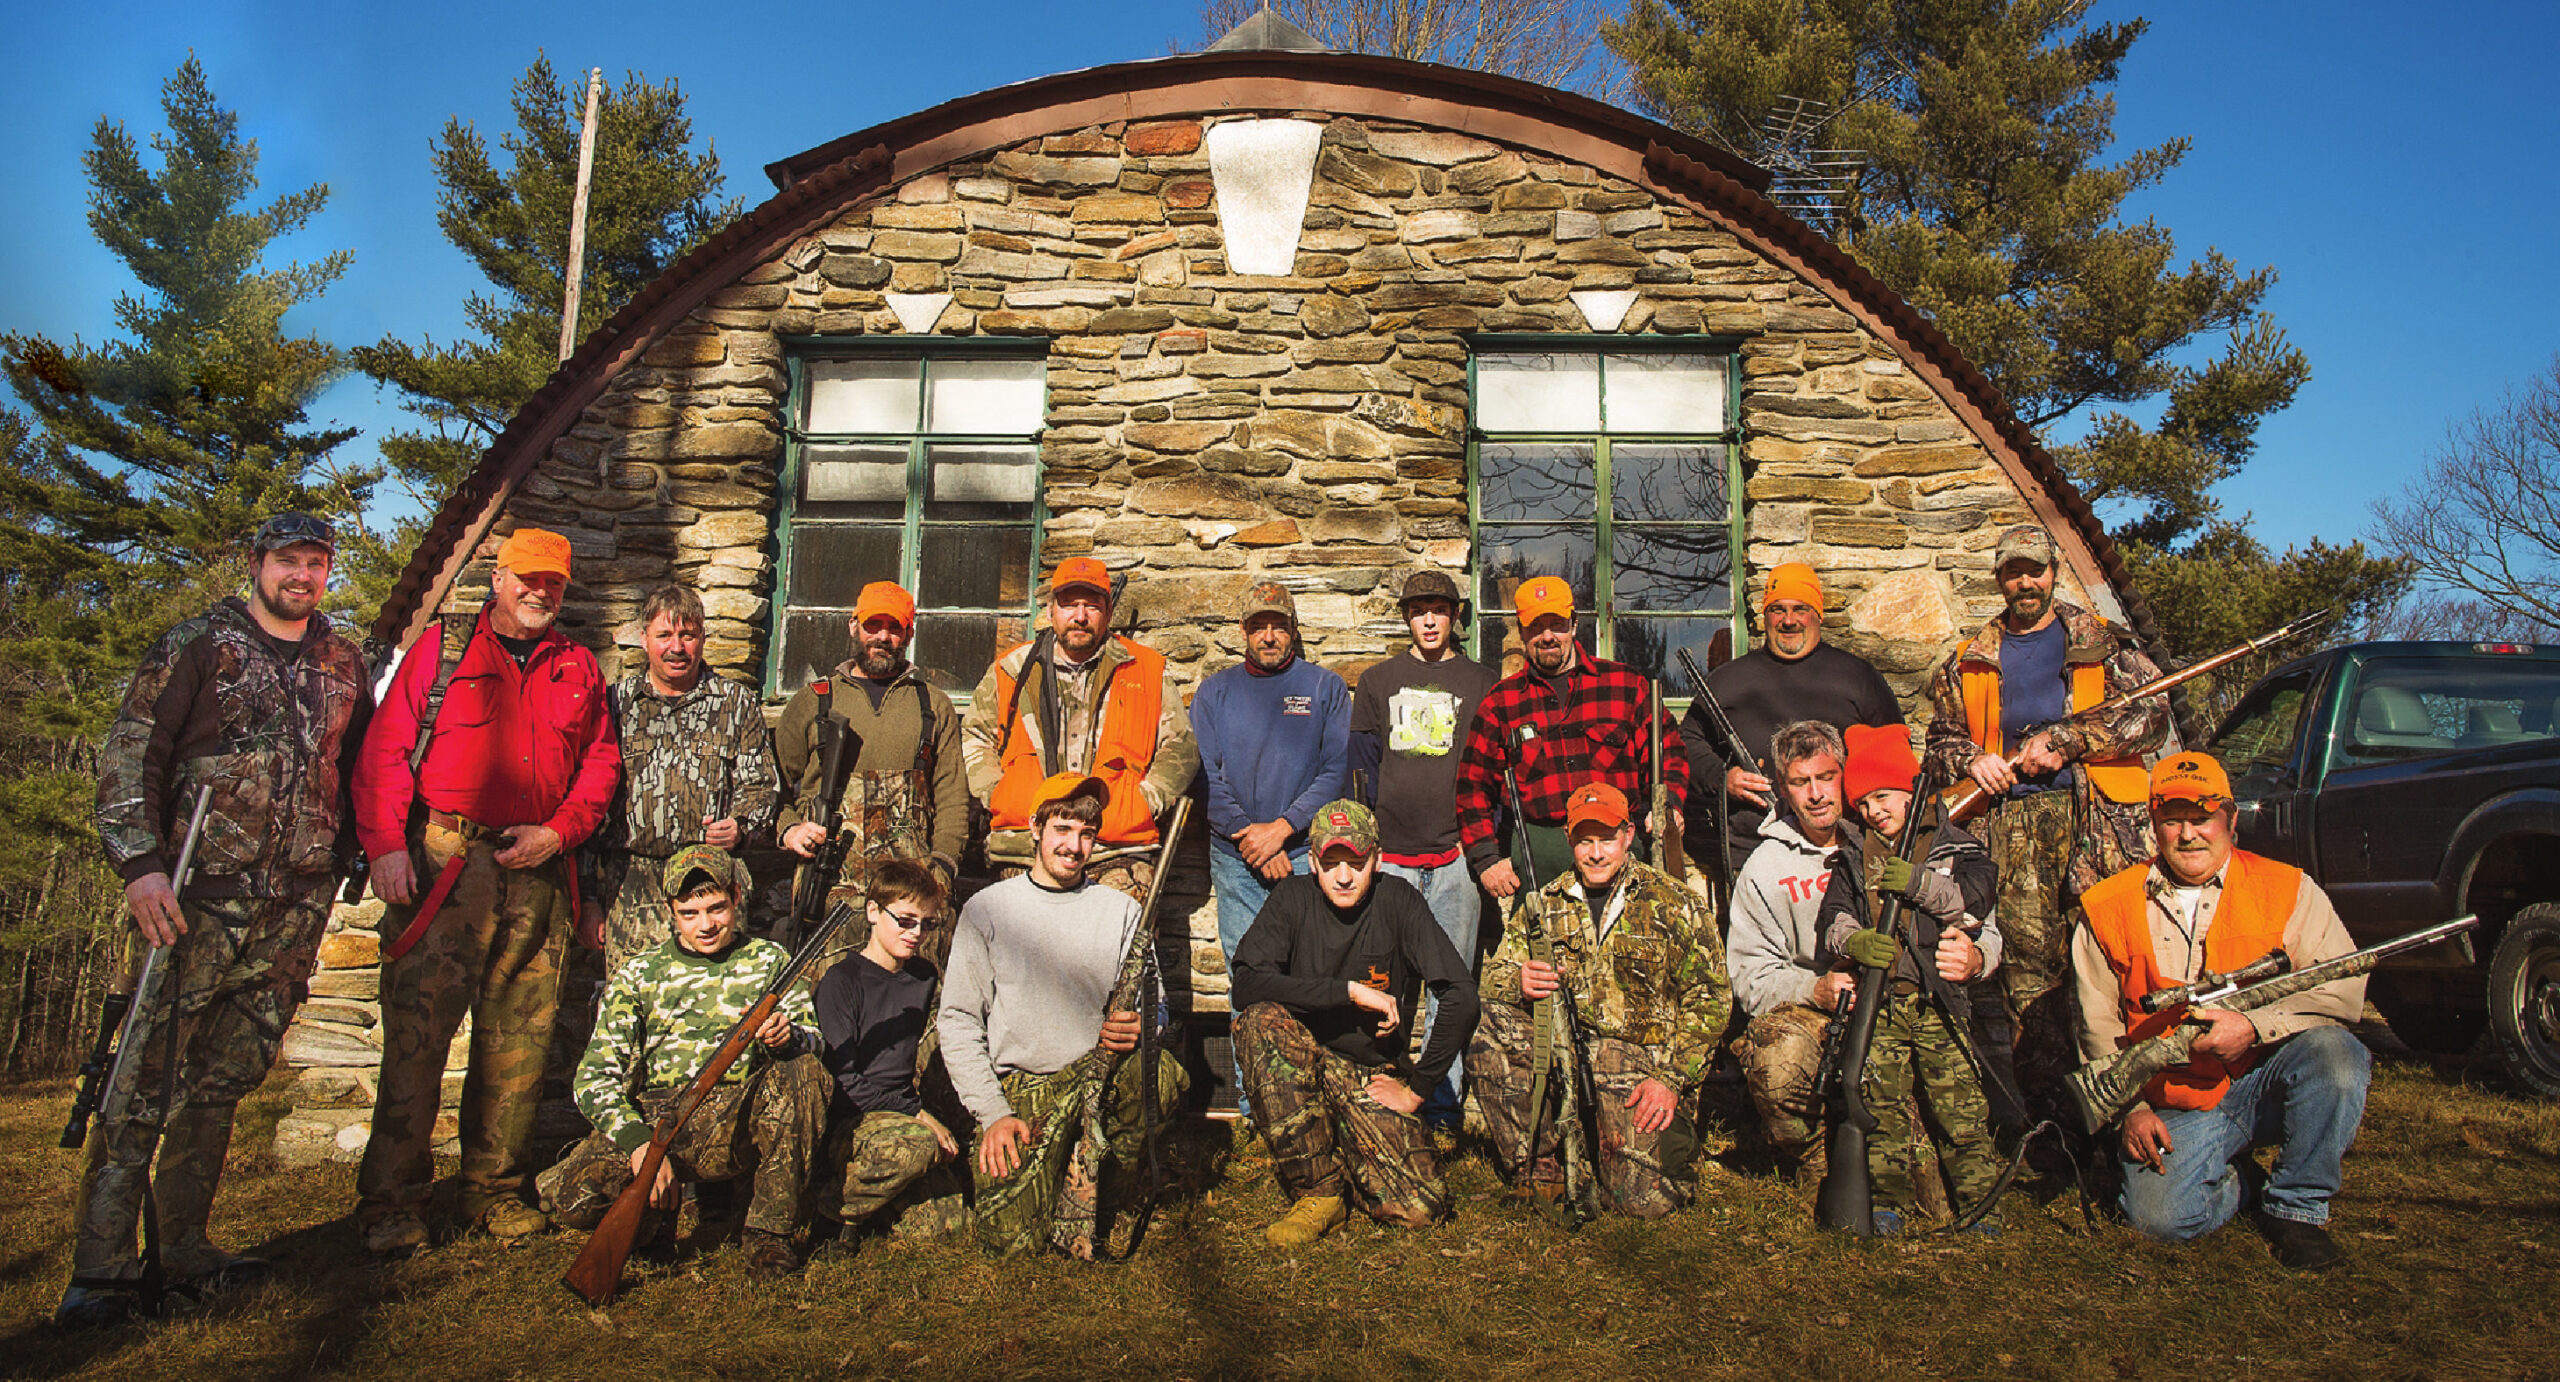 A group of New England deer hunters at their deer camp.